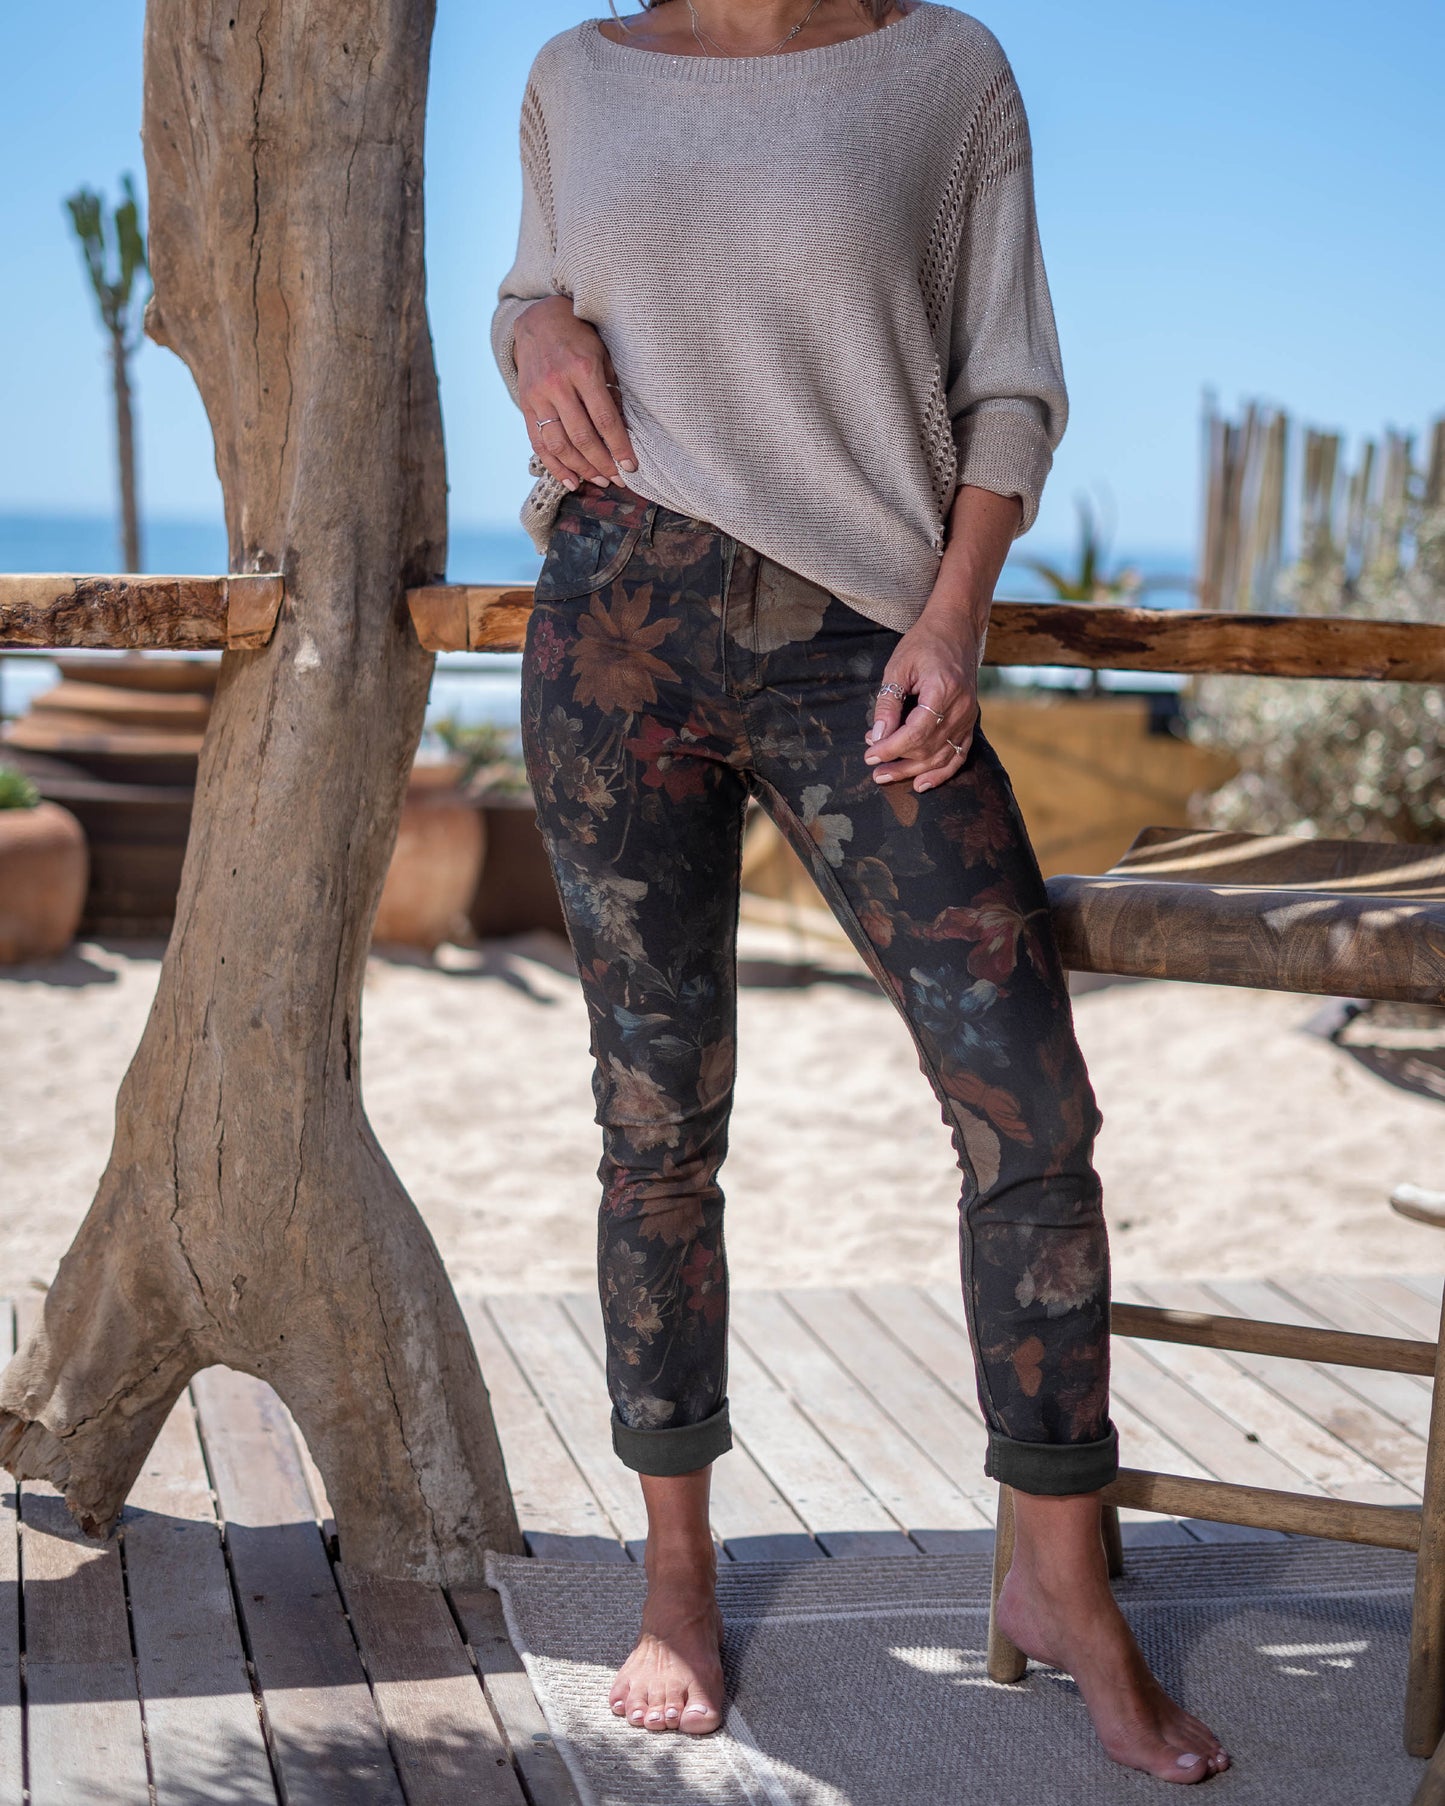 A single pair of jeans that effortlessly transitions from bold floral elegance to sleek block color, ensuring you're always ready for any fashion mood. On one side, embrace the vibrant beauty of nature with our eye-catching floral print. On the flip side, revel in the simplicity and sophistication of the block color design. This jean is a straight cut with a medium cut waistband